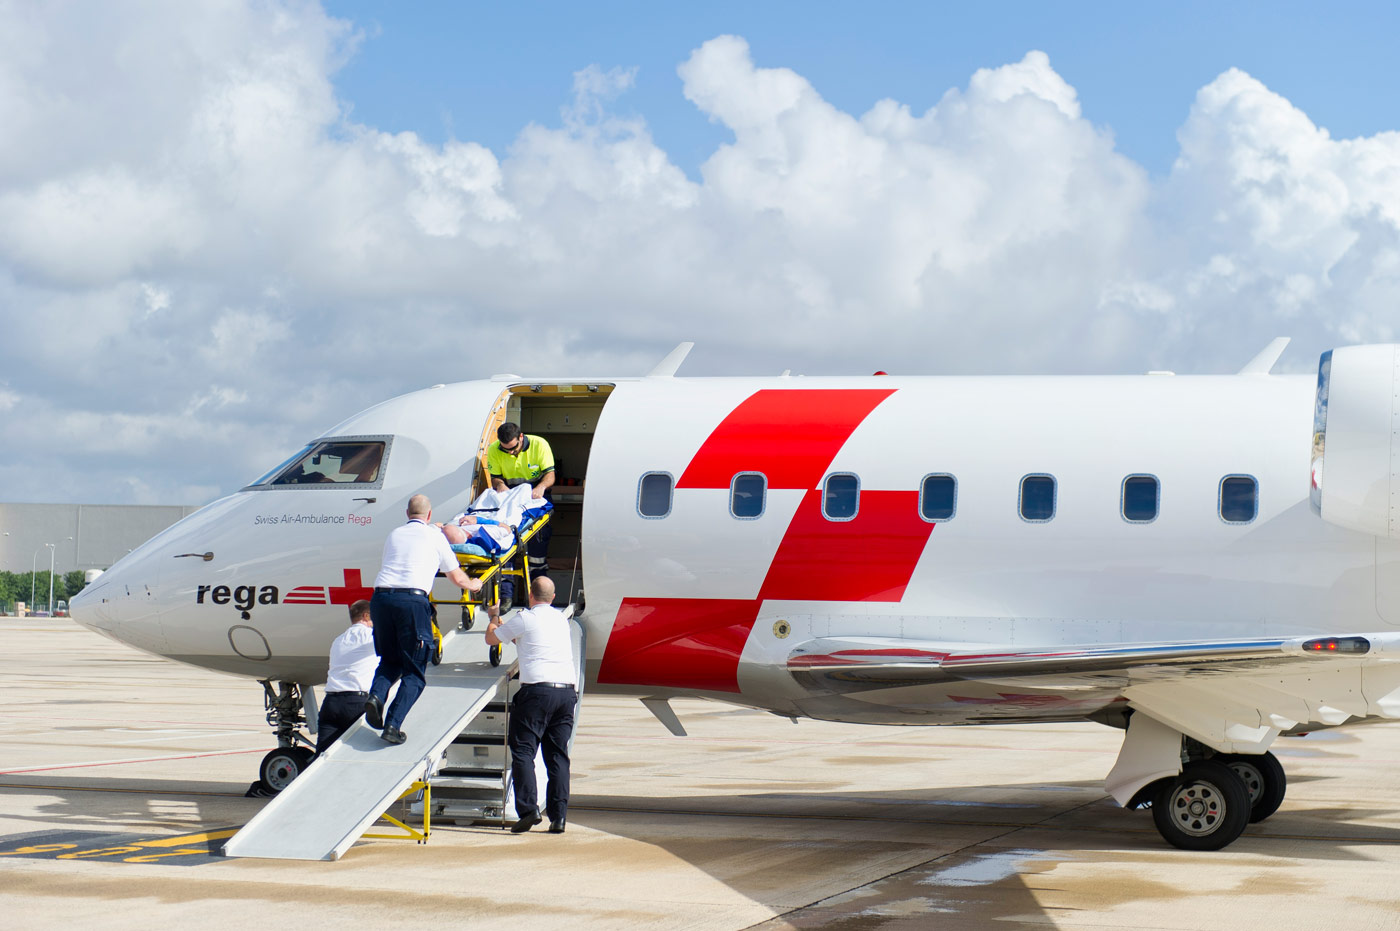 The ground ambulance transports the patient into the aircraft, Palma de Mallorca, Spain, 2012